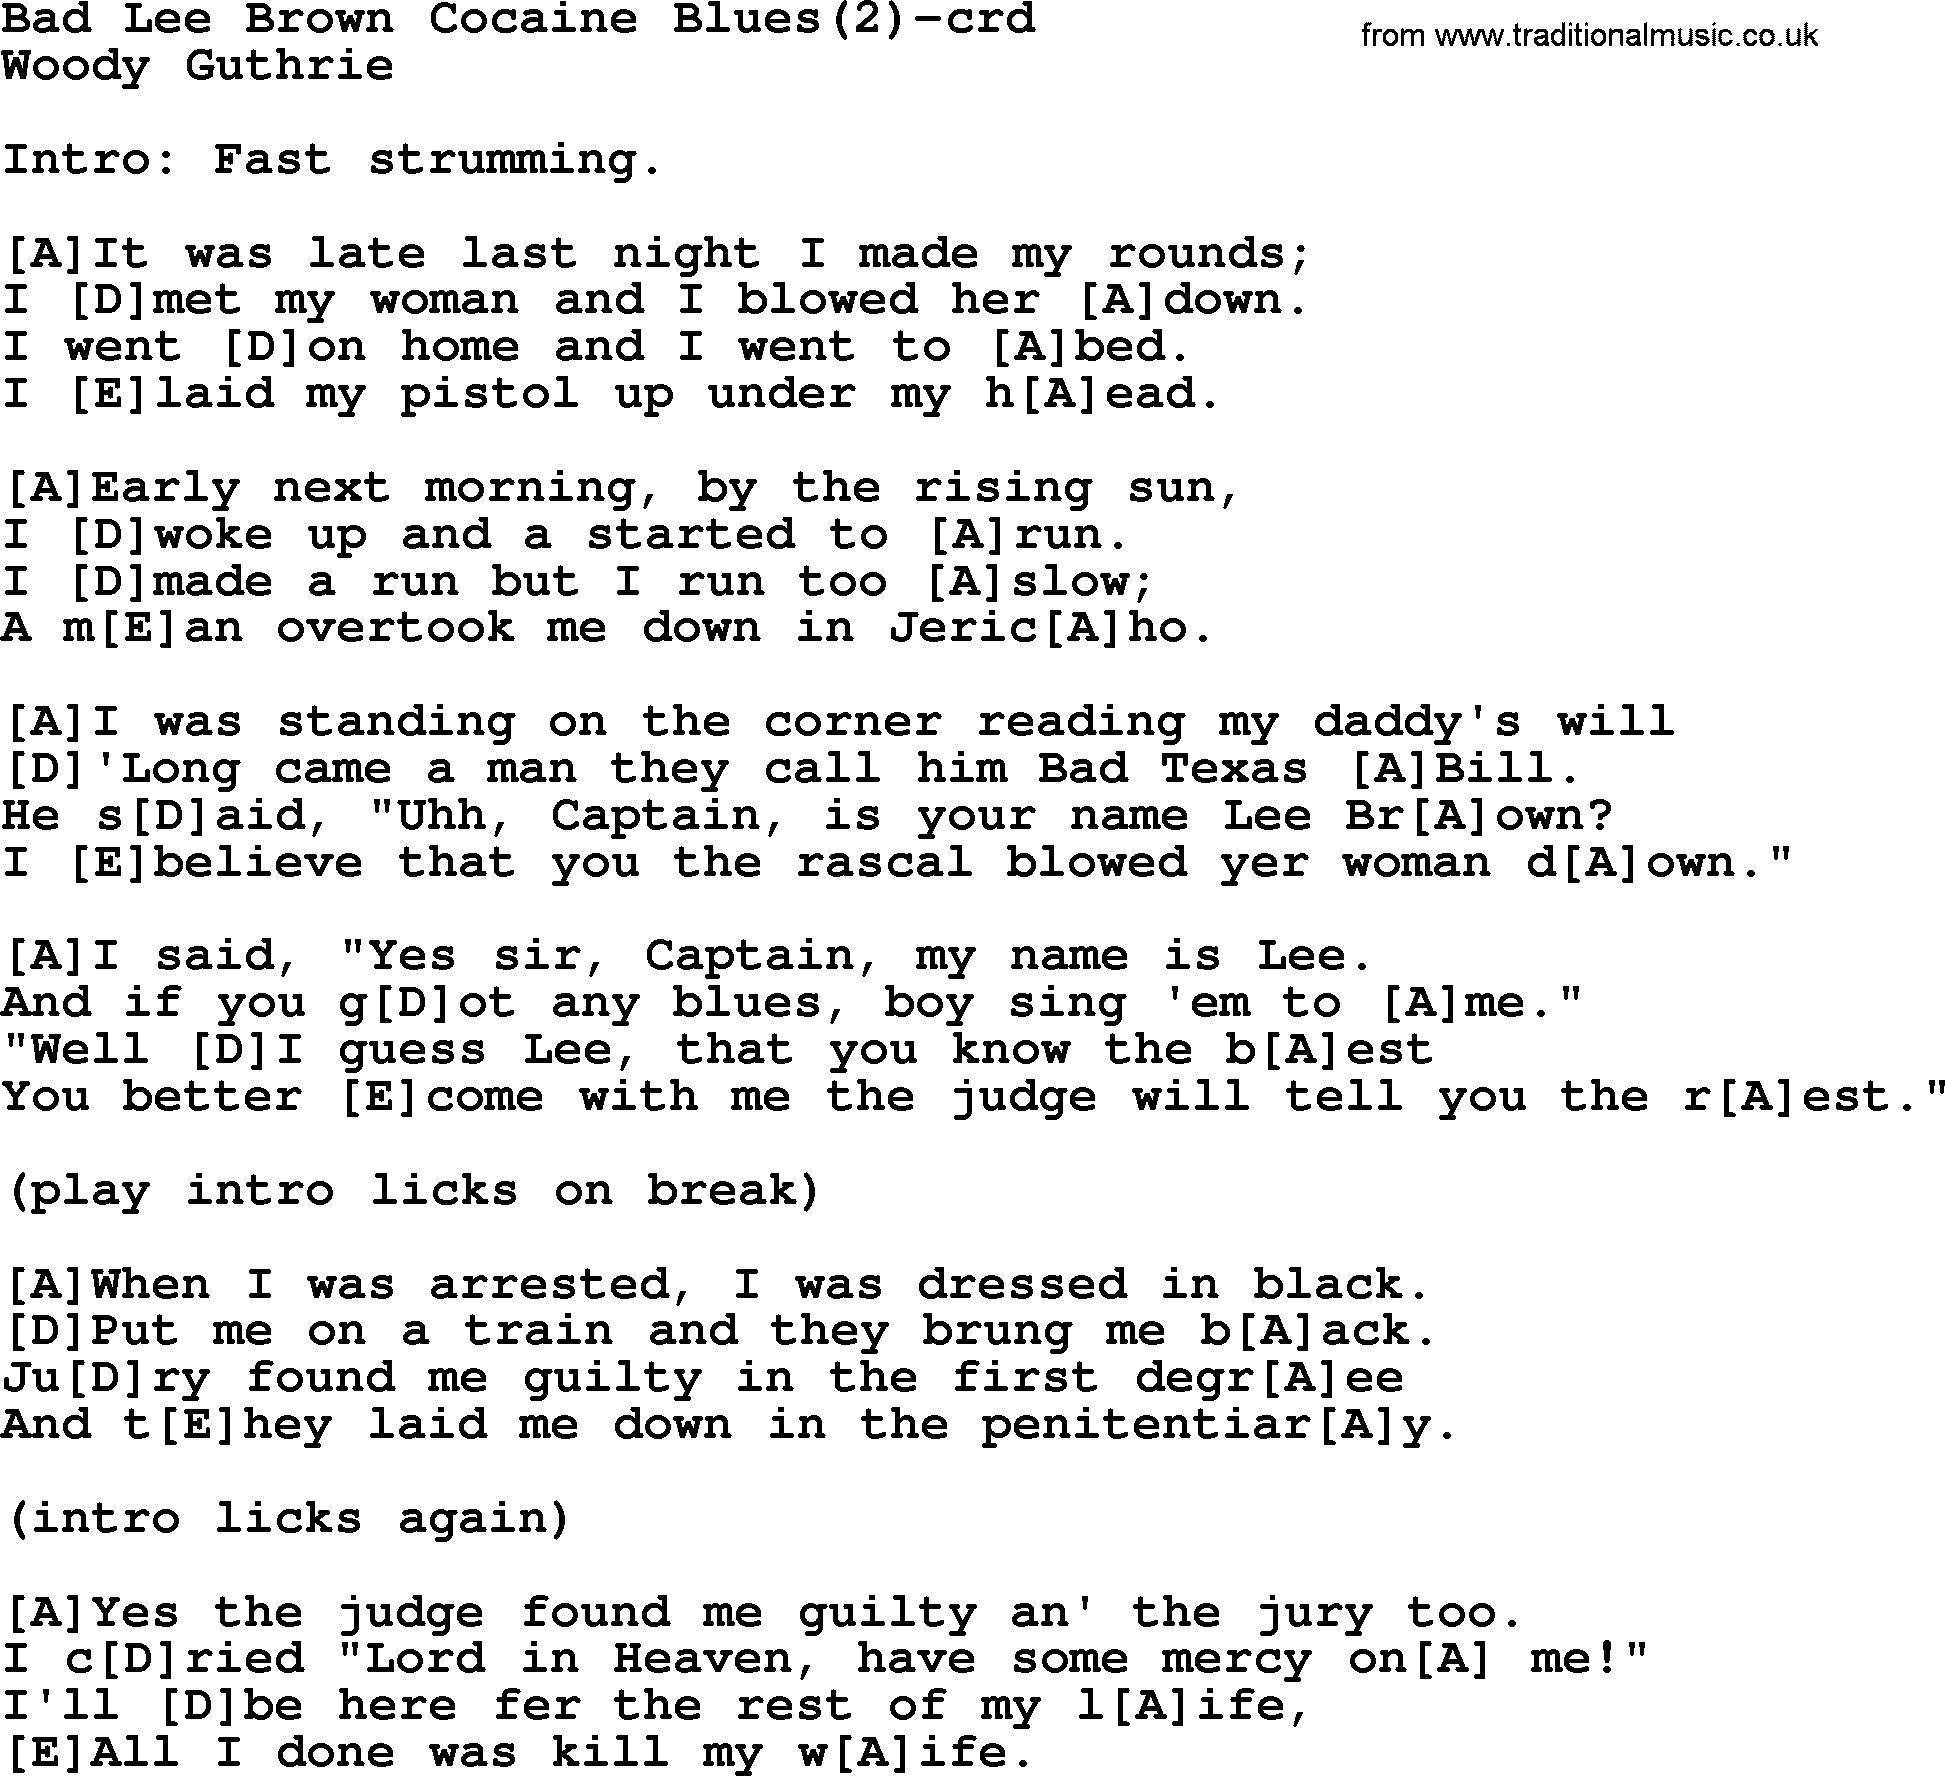 Woody Guthrie song Bad Lee Brown Cocaine Blues(2) lyrics and chords